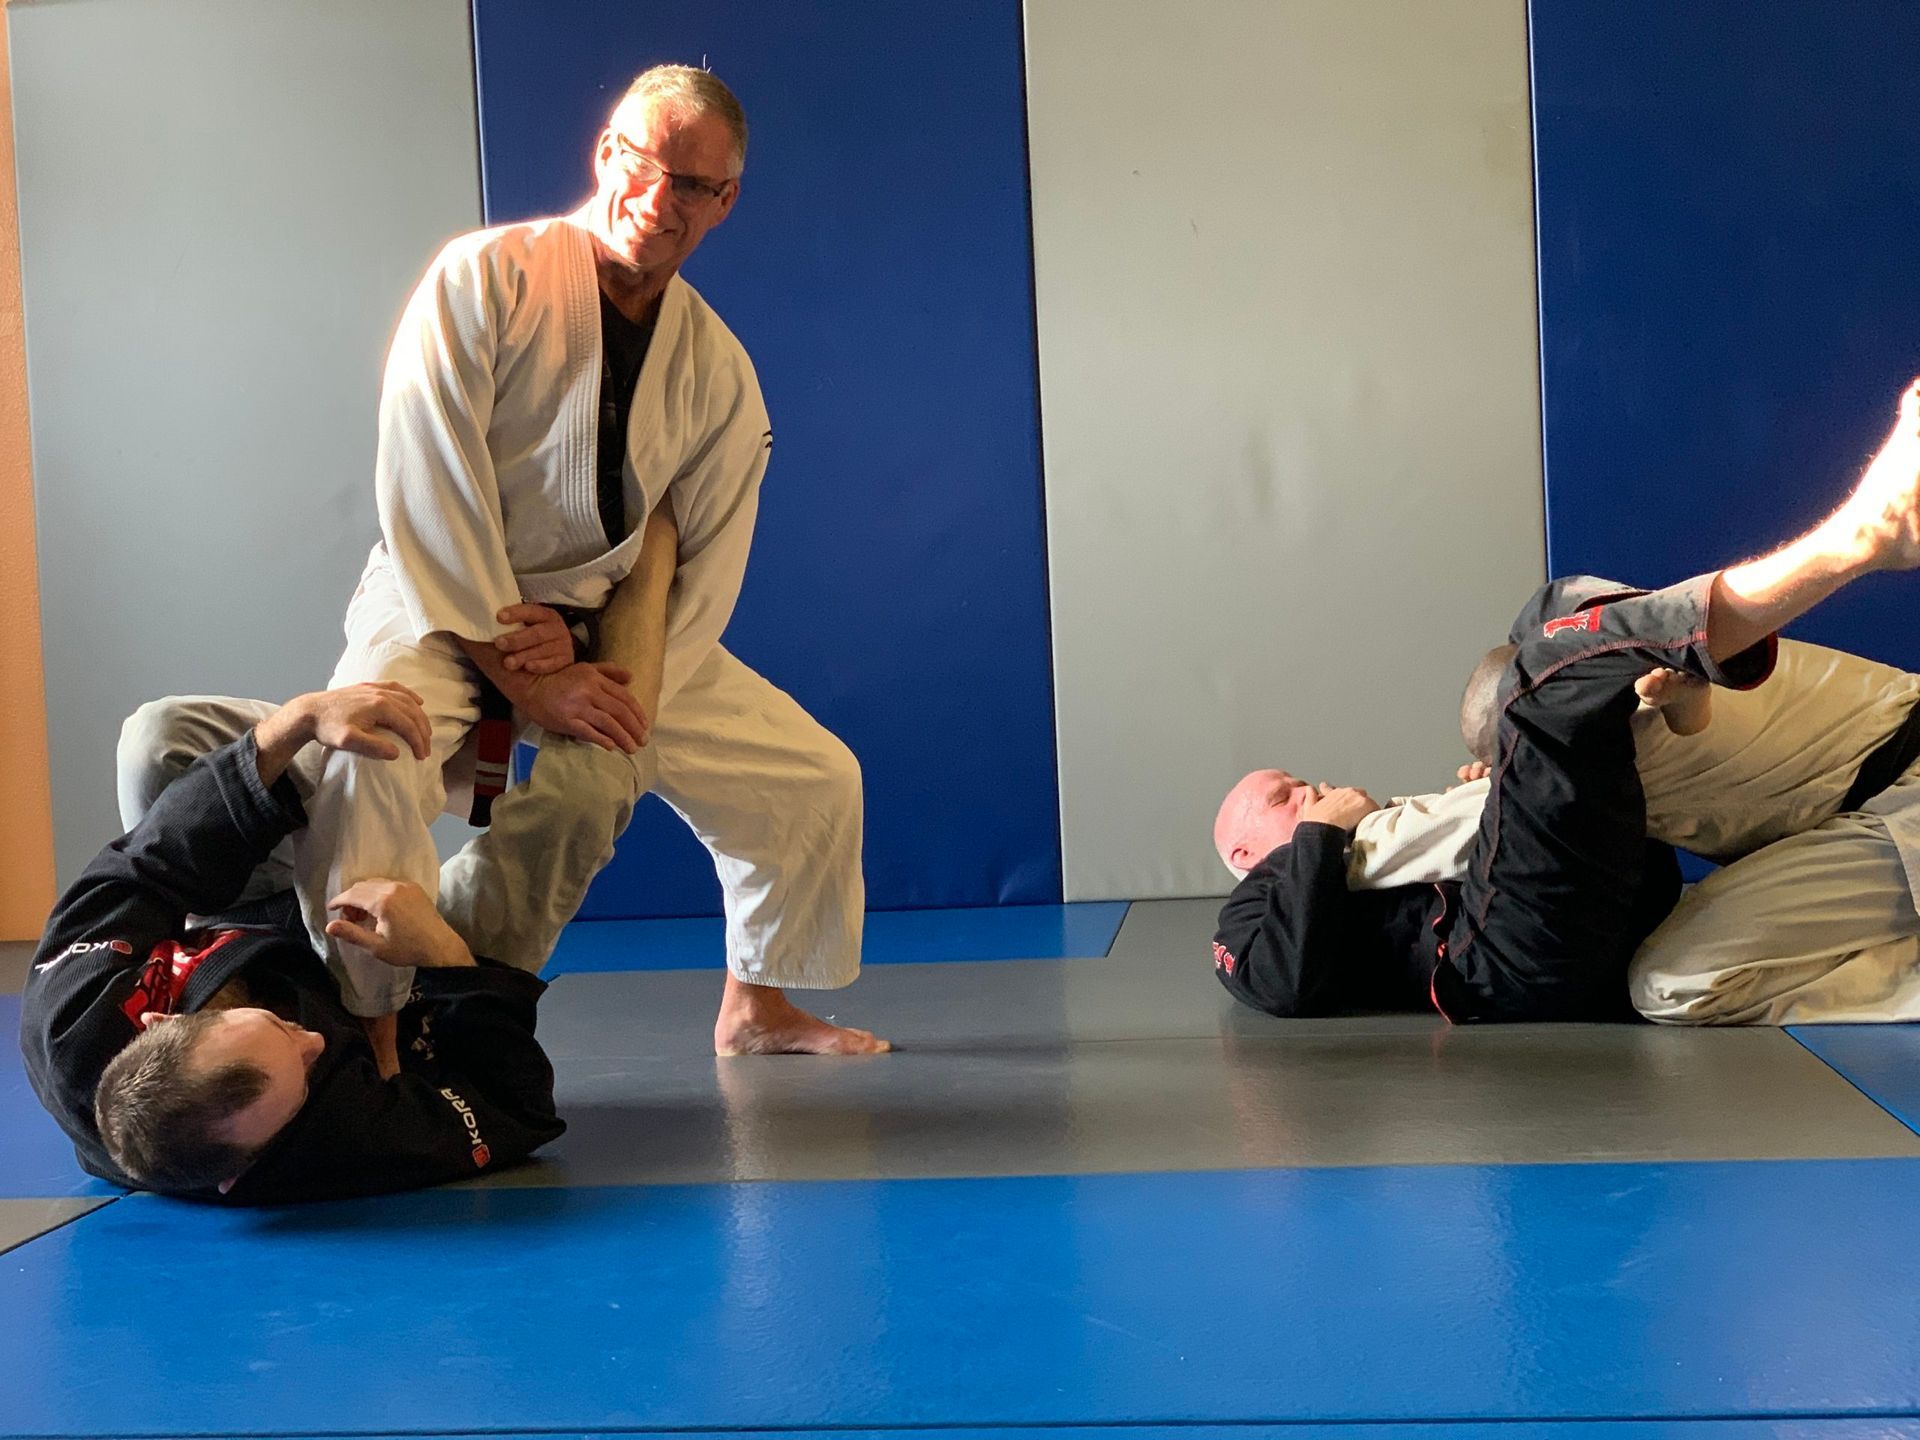 A group of men are practicing martial arts on a blue mat.